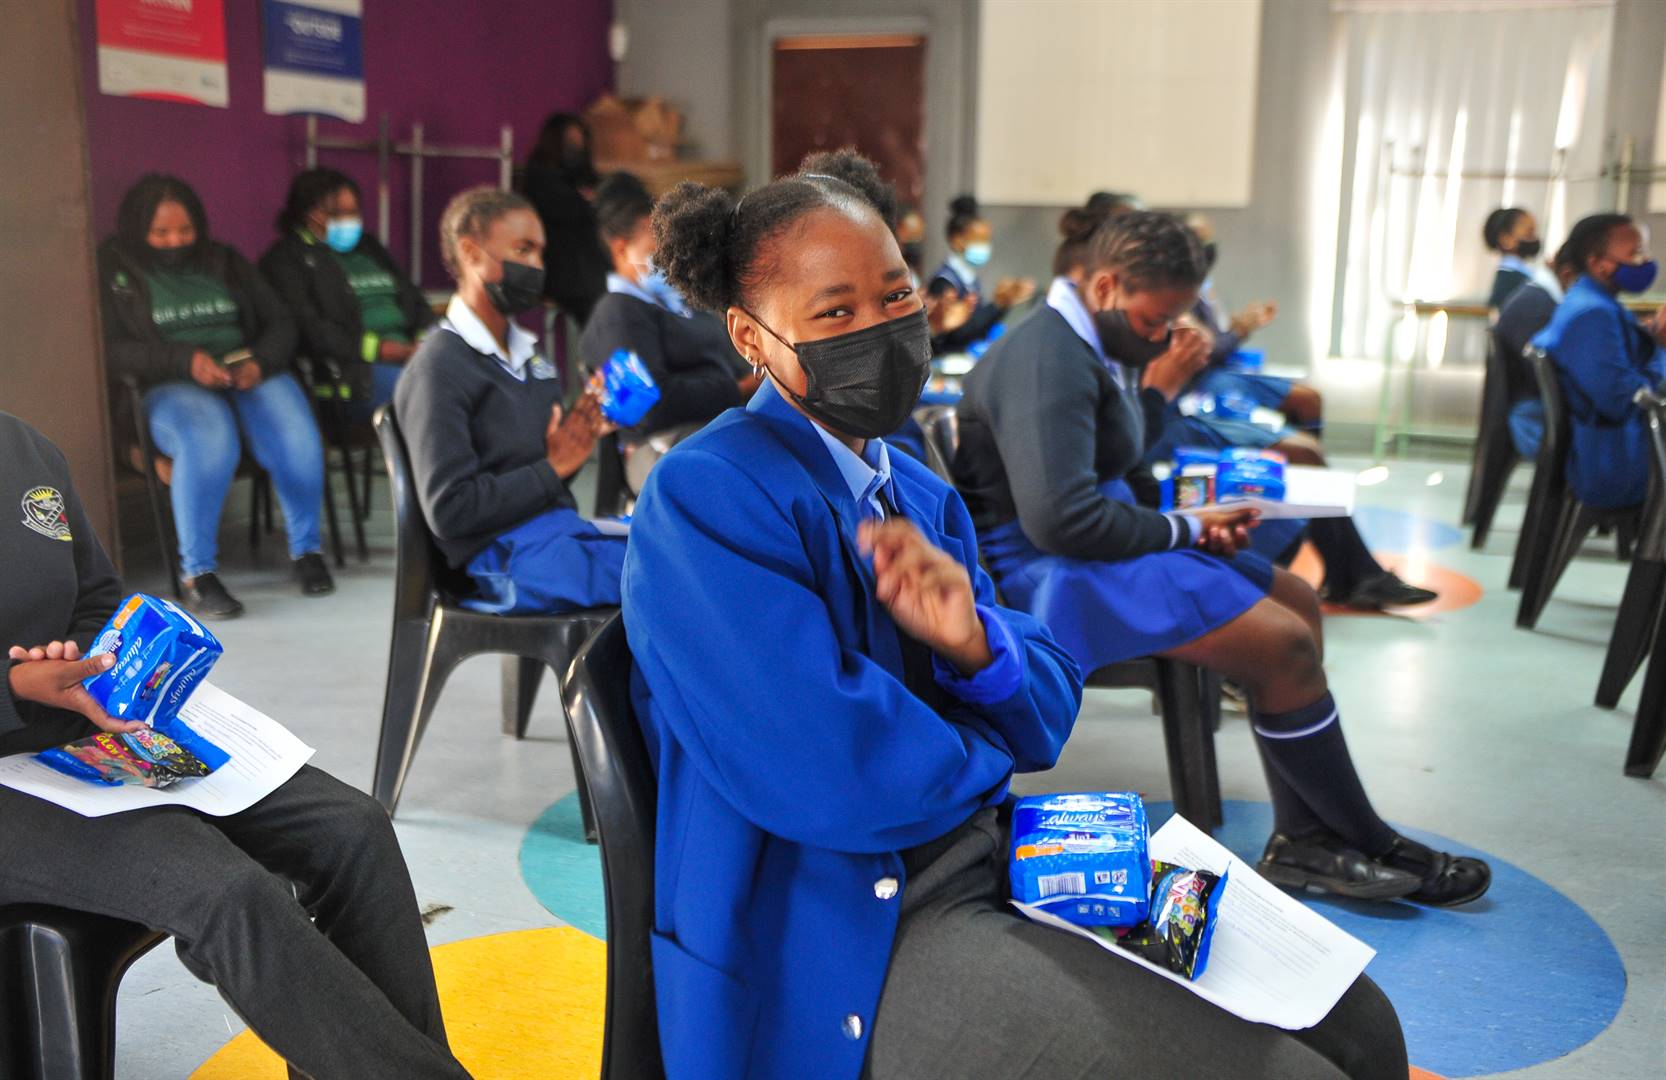 Three organisations team up to alleviate 'period poverty' by donating  sanitary pads to pupils